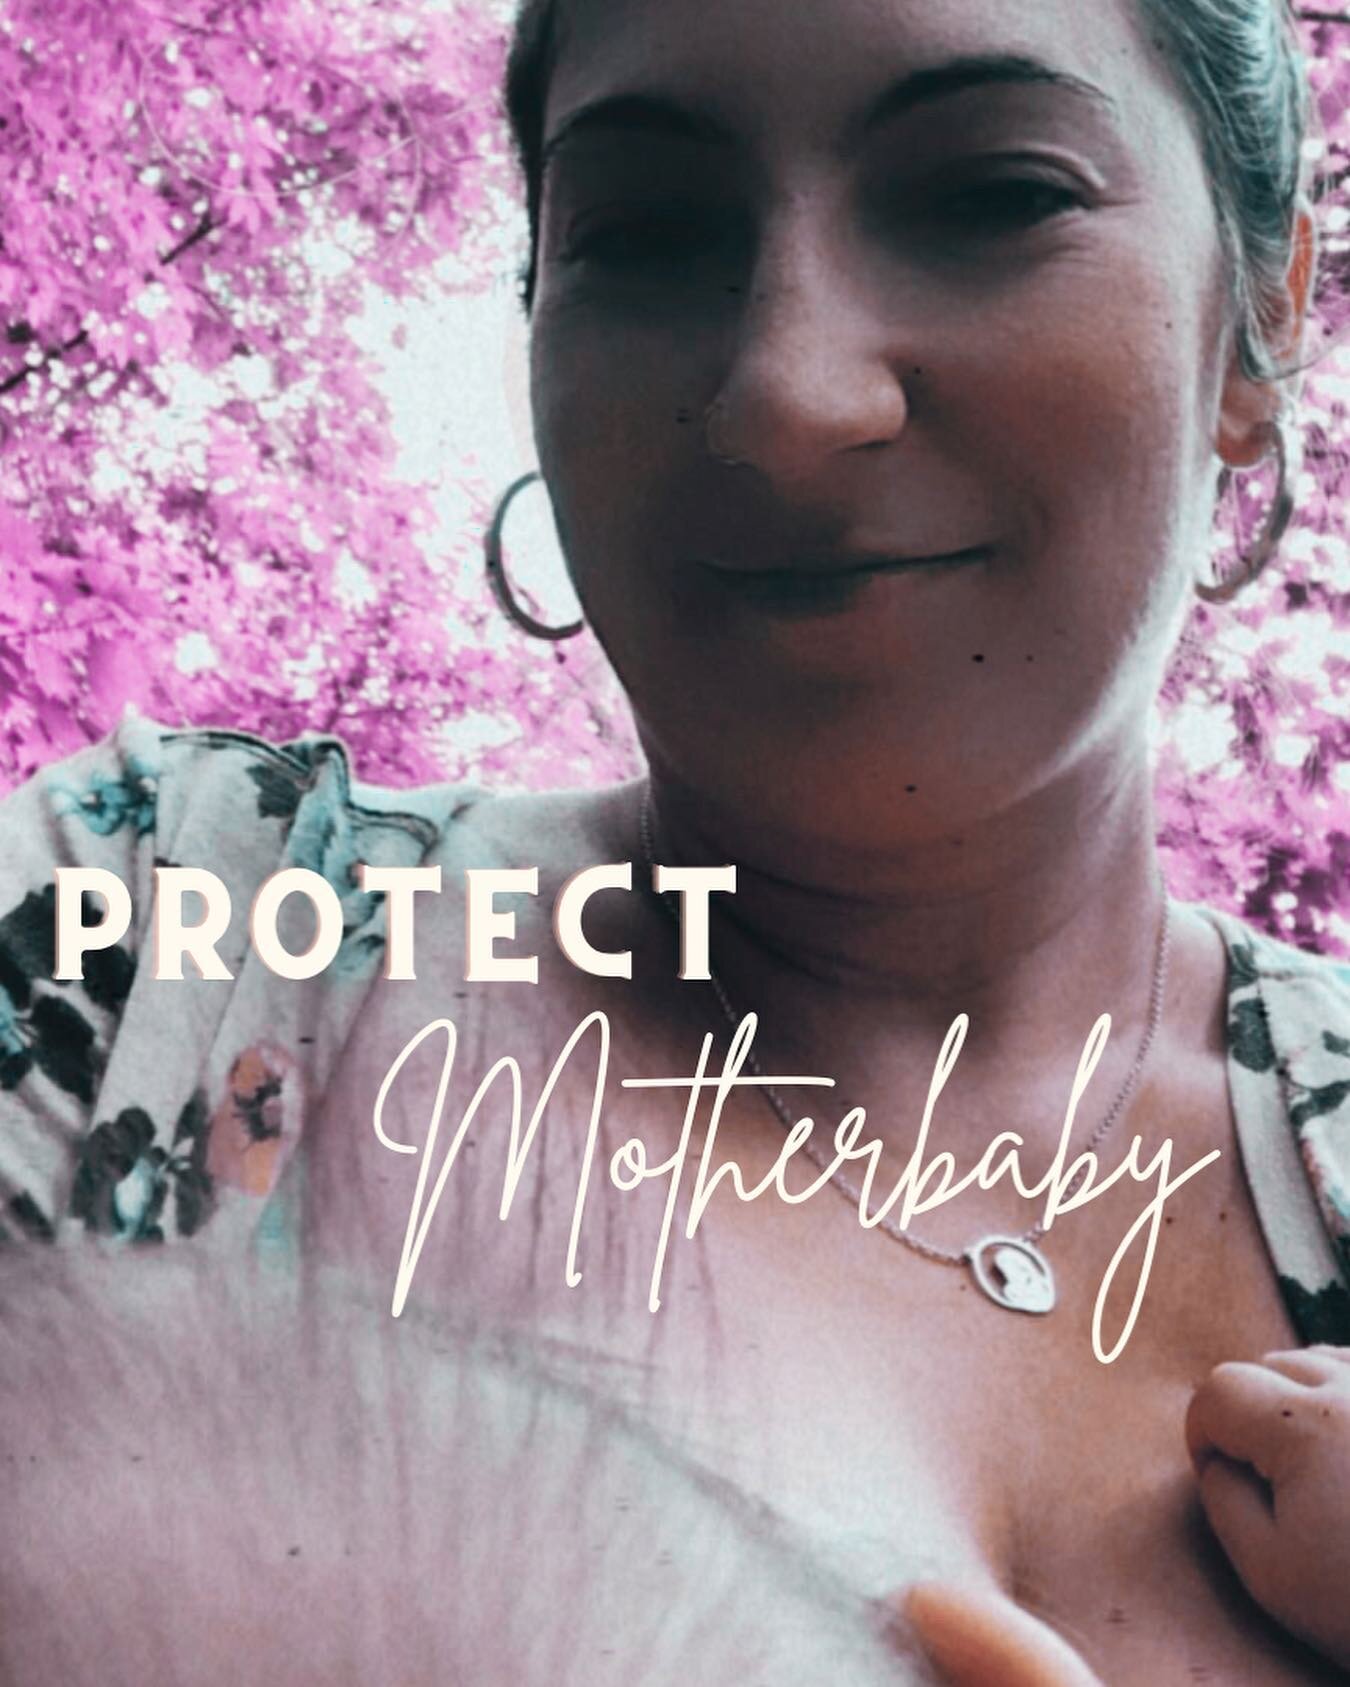 What I am for: informed consent, protecting the dyad, preserving the sacredness of the perinatal period.

What I am against: coercion, societal pressure for mothers to ignore they and their babies&rsquo; biological needs, predatory marketing from com